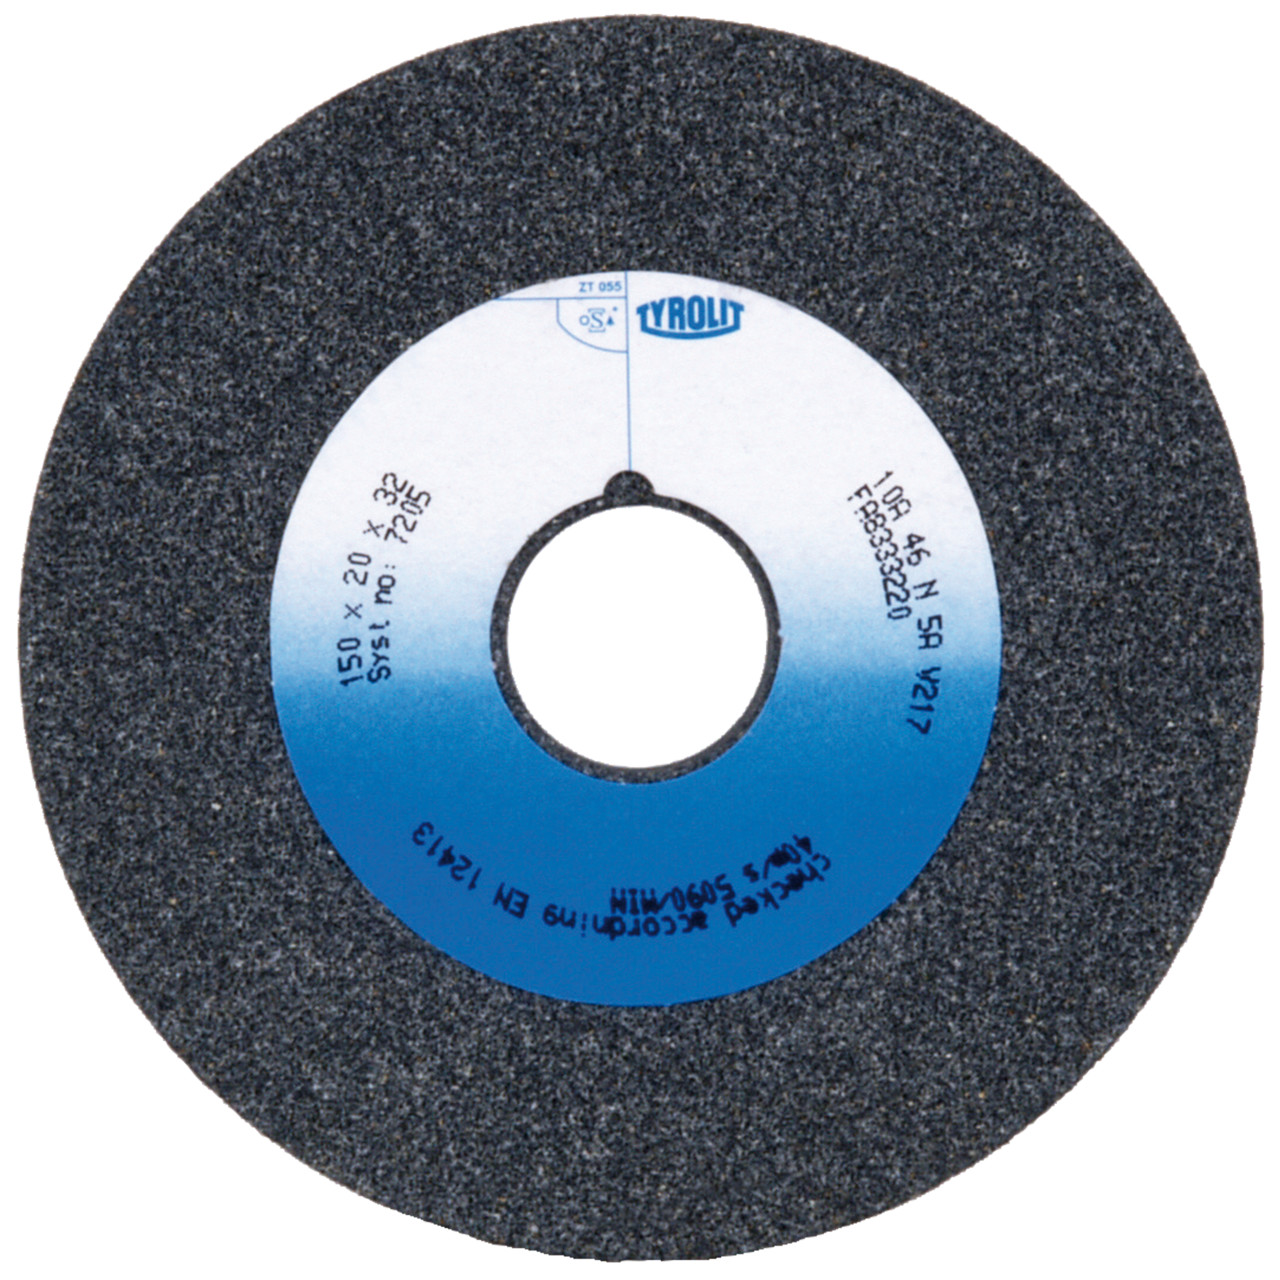 Tyrolit Conventional ceramic grinding discs DxDxH 150x25x32 For unalloyed and low-alloy steels, shape: 1, Art. 52223